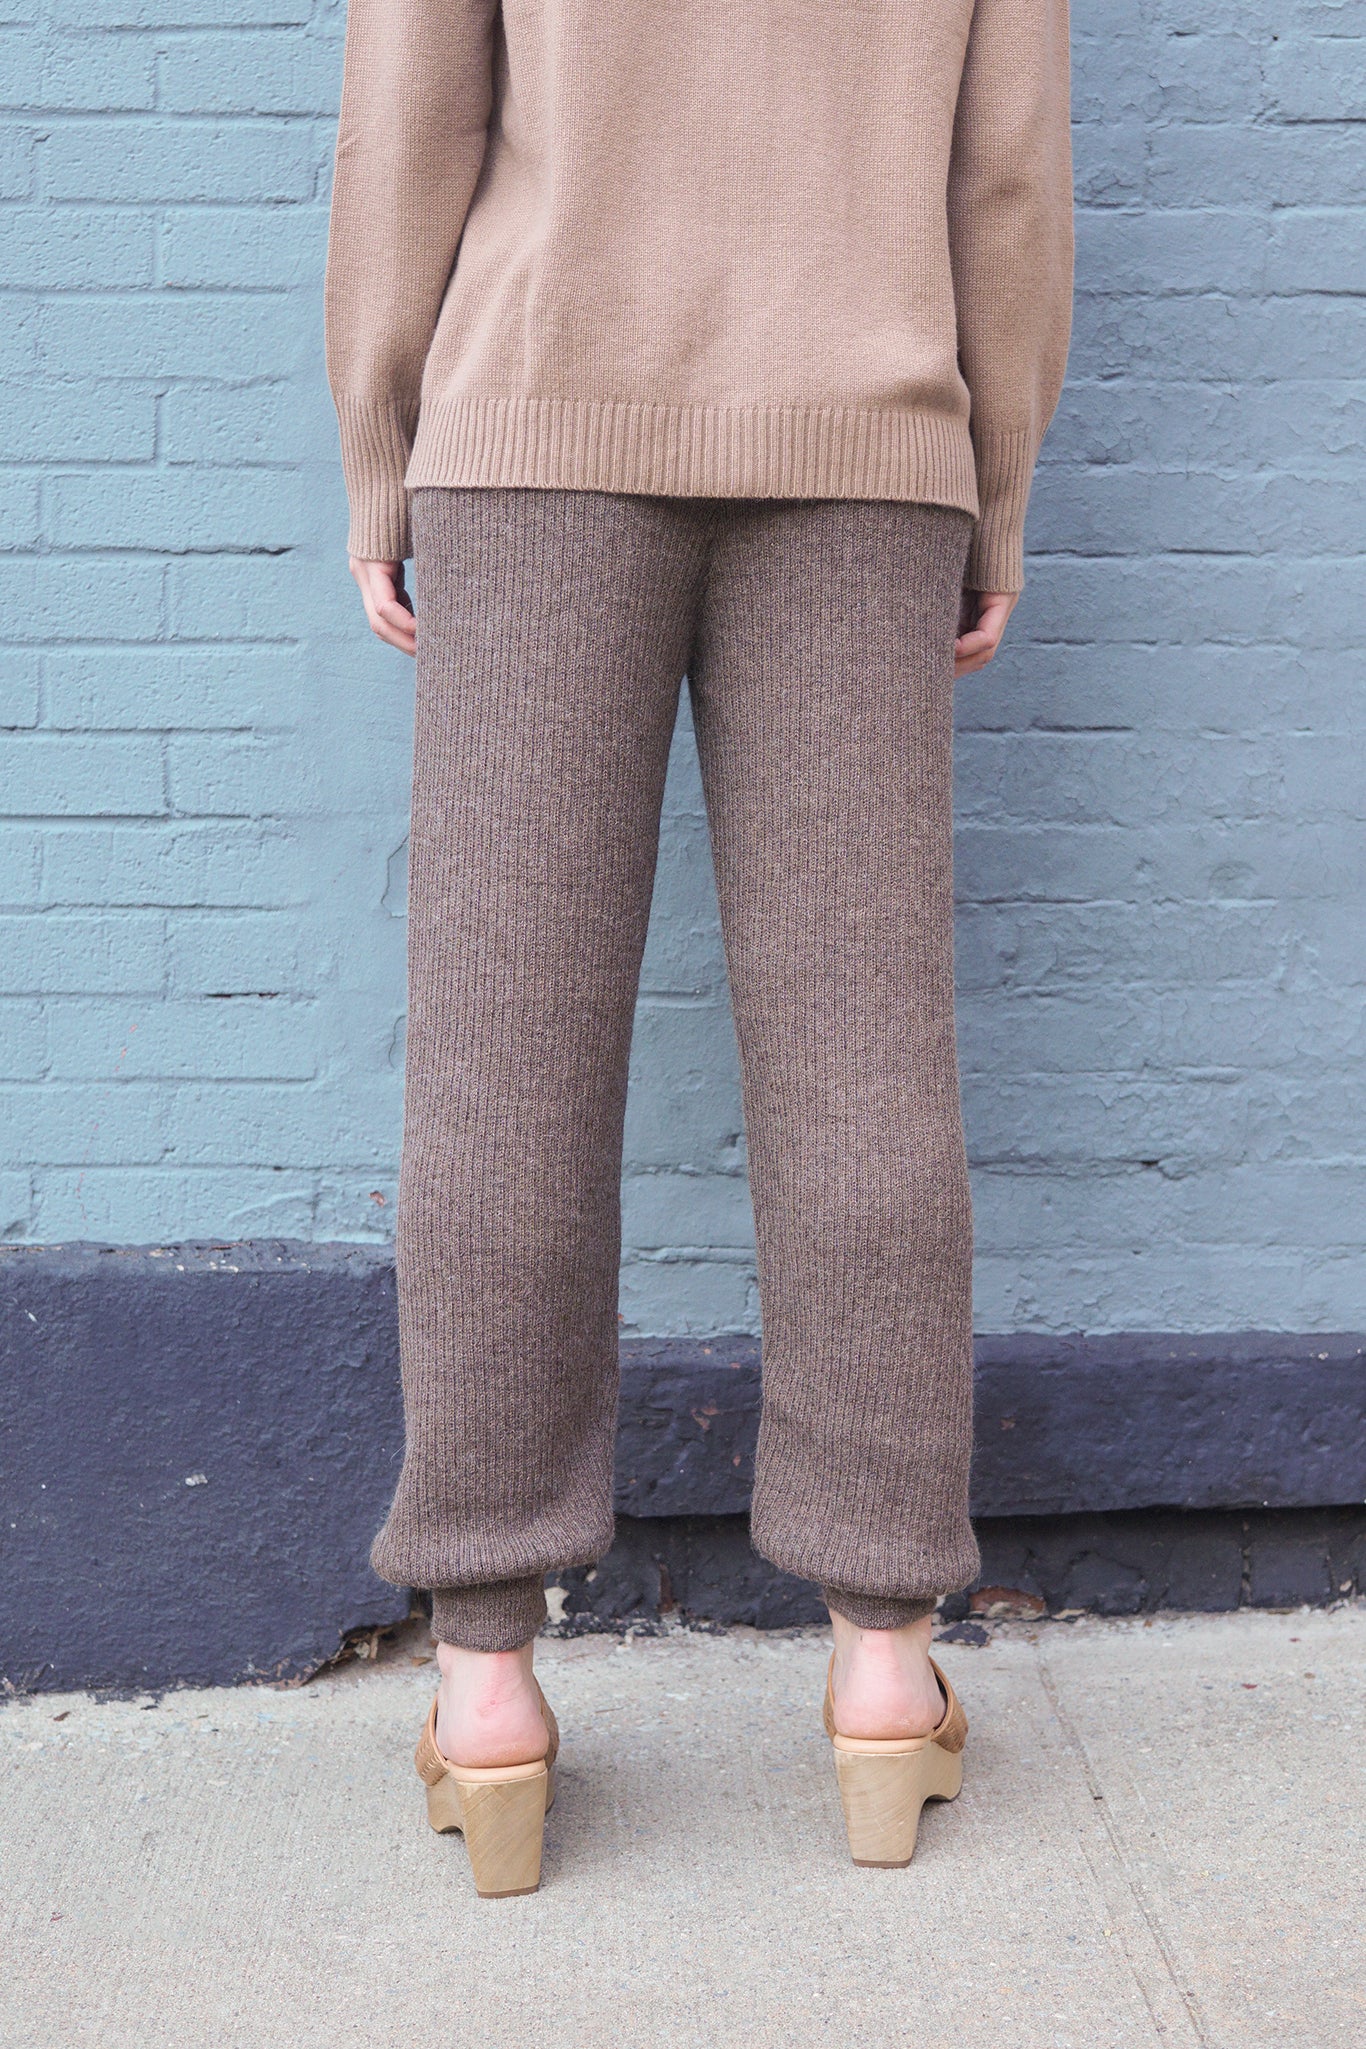 Cozy baby alpaca joggers perfect fall pant. Made in peru.